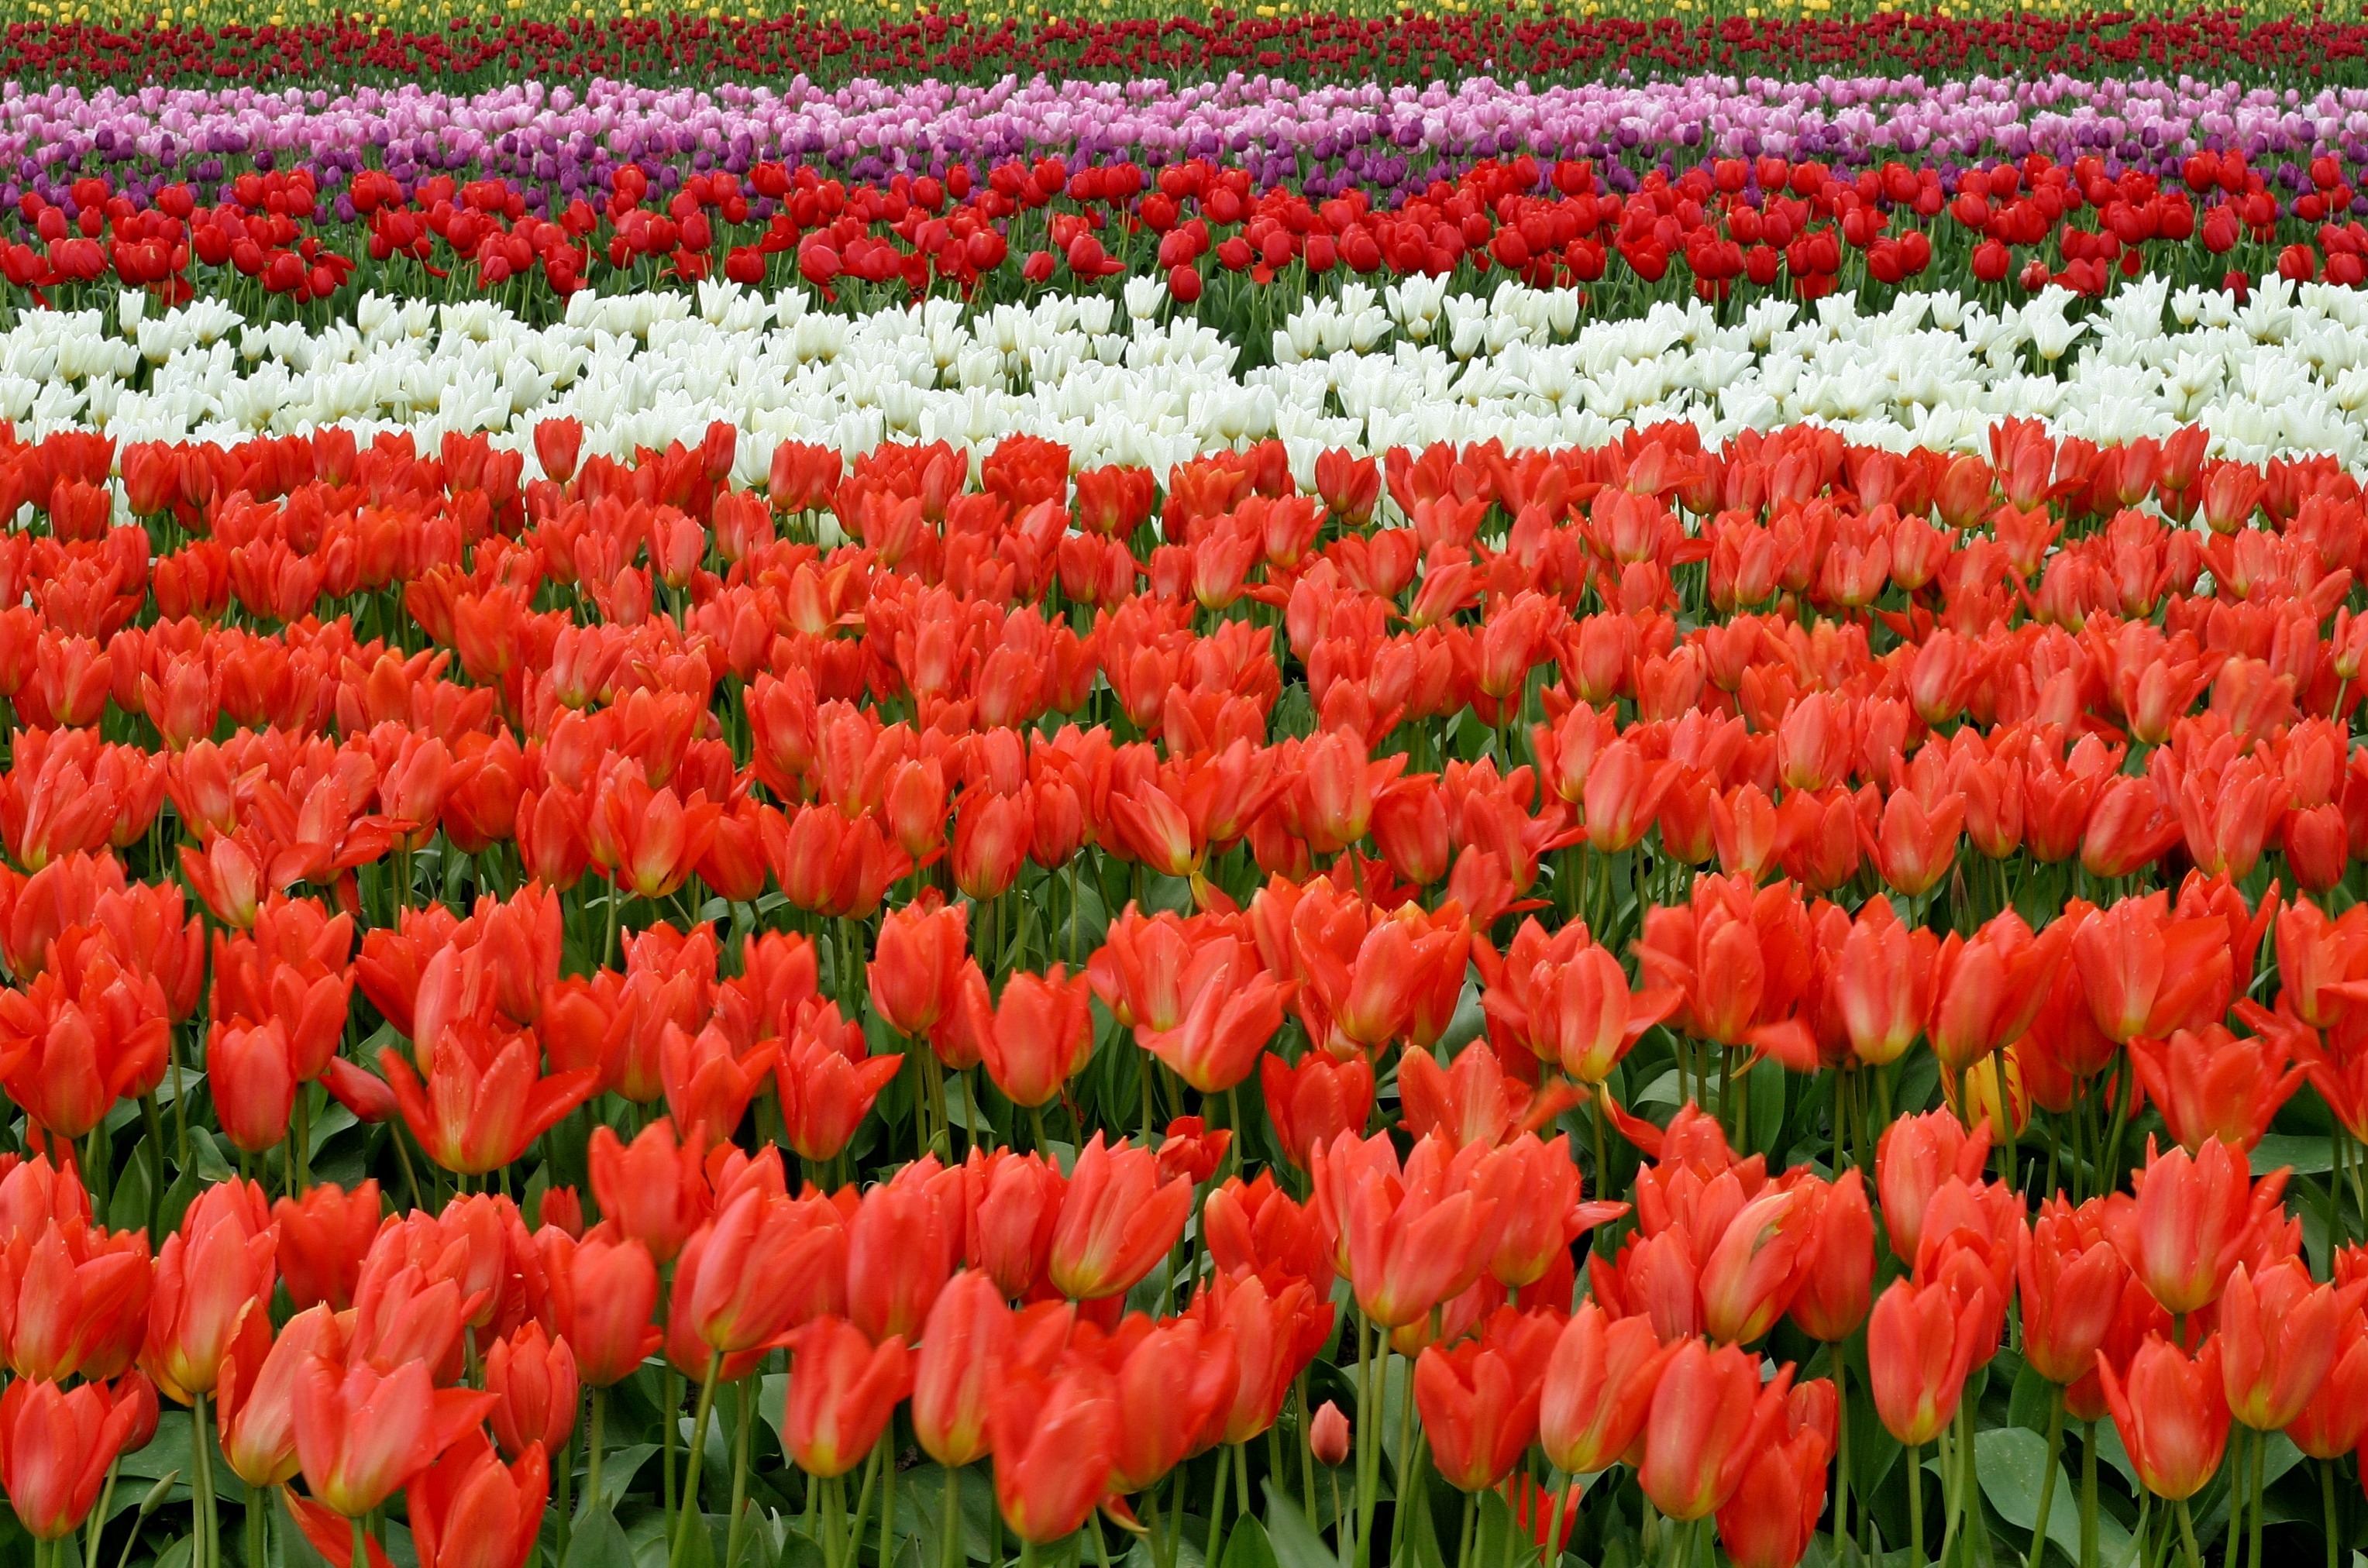 A field of rows of colored tulips